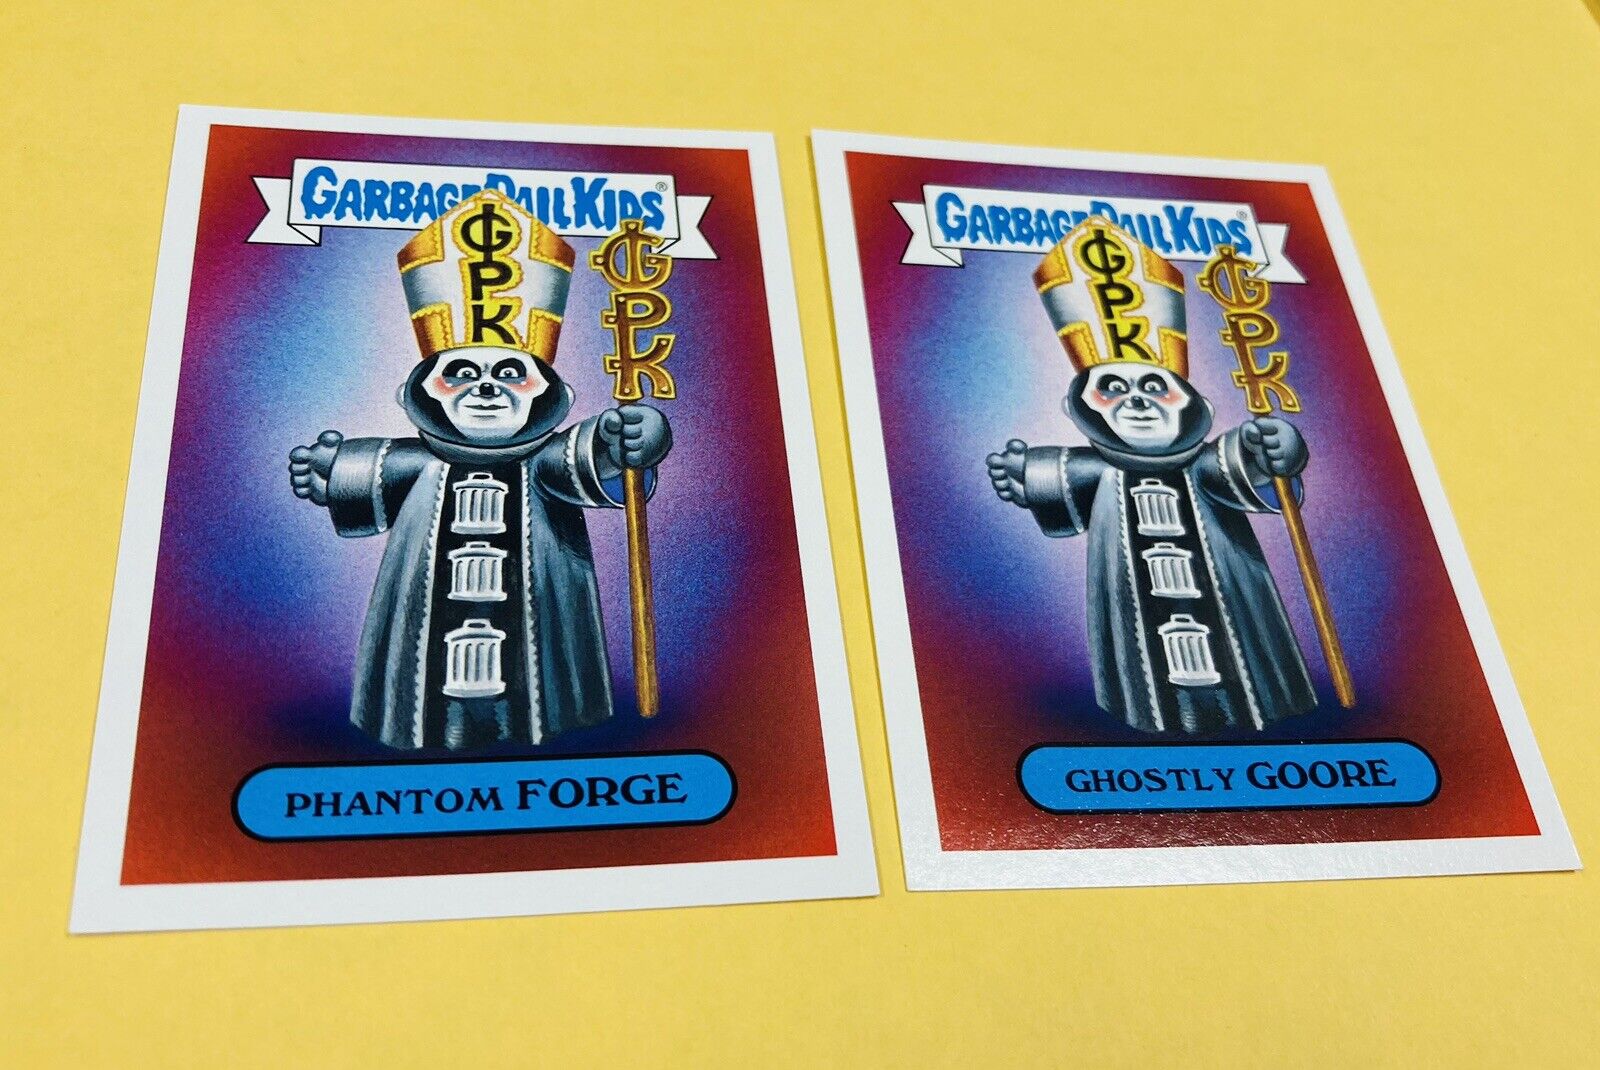 2017 Topps Garbage Pail Kids GHOST Card 9a & 9b Battle Of The Bands GPK